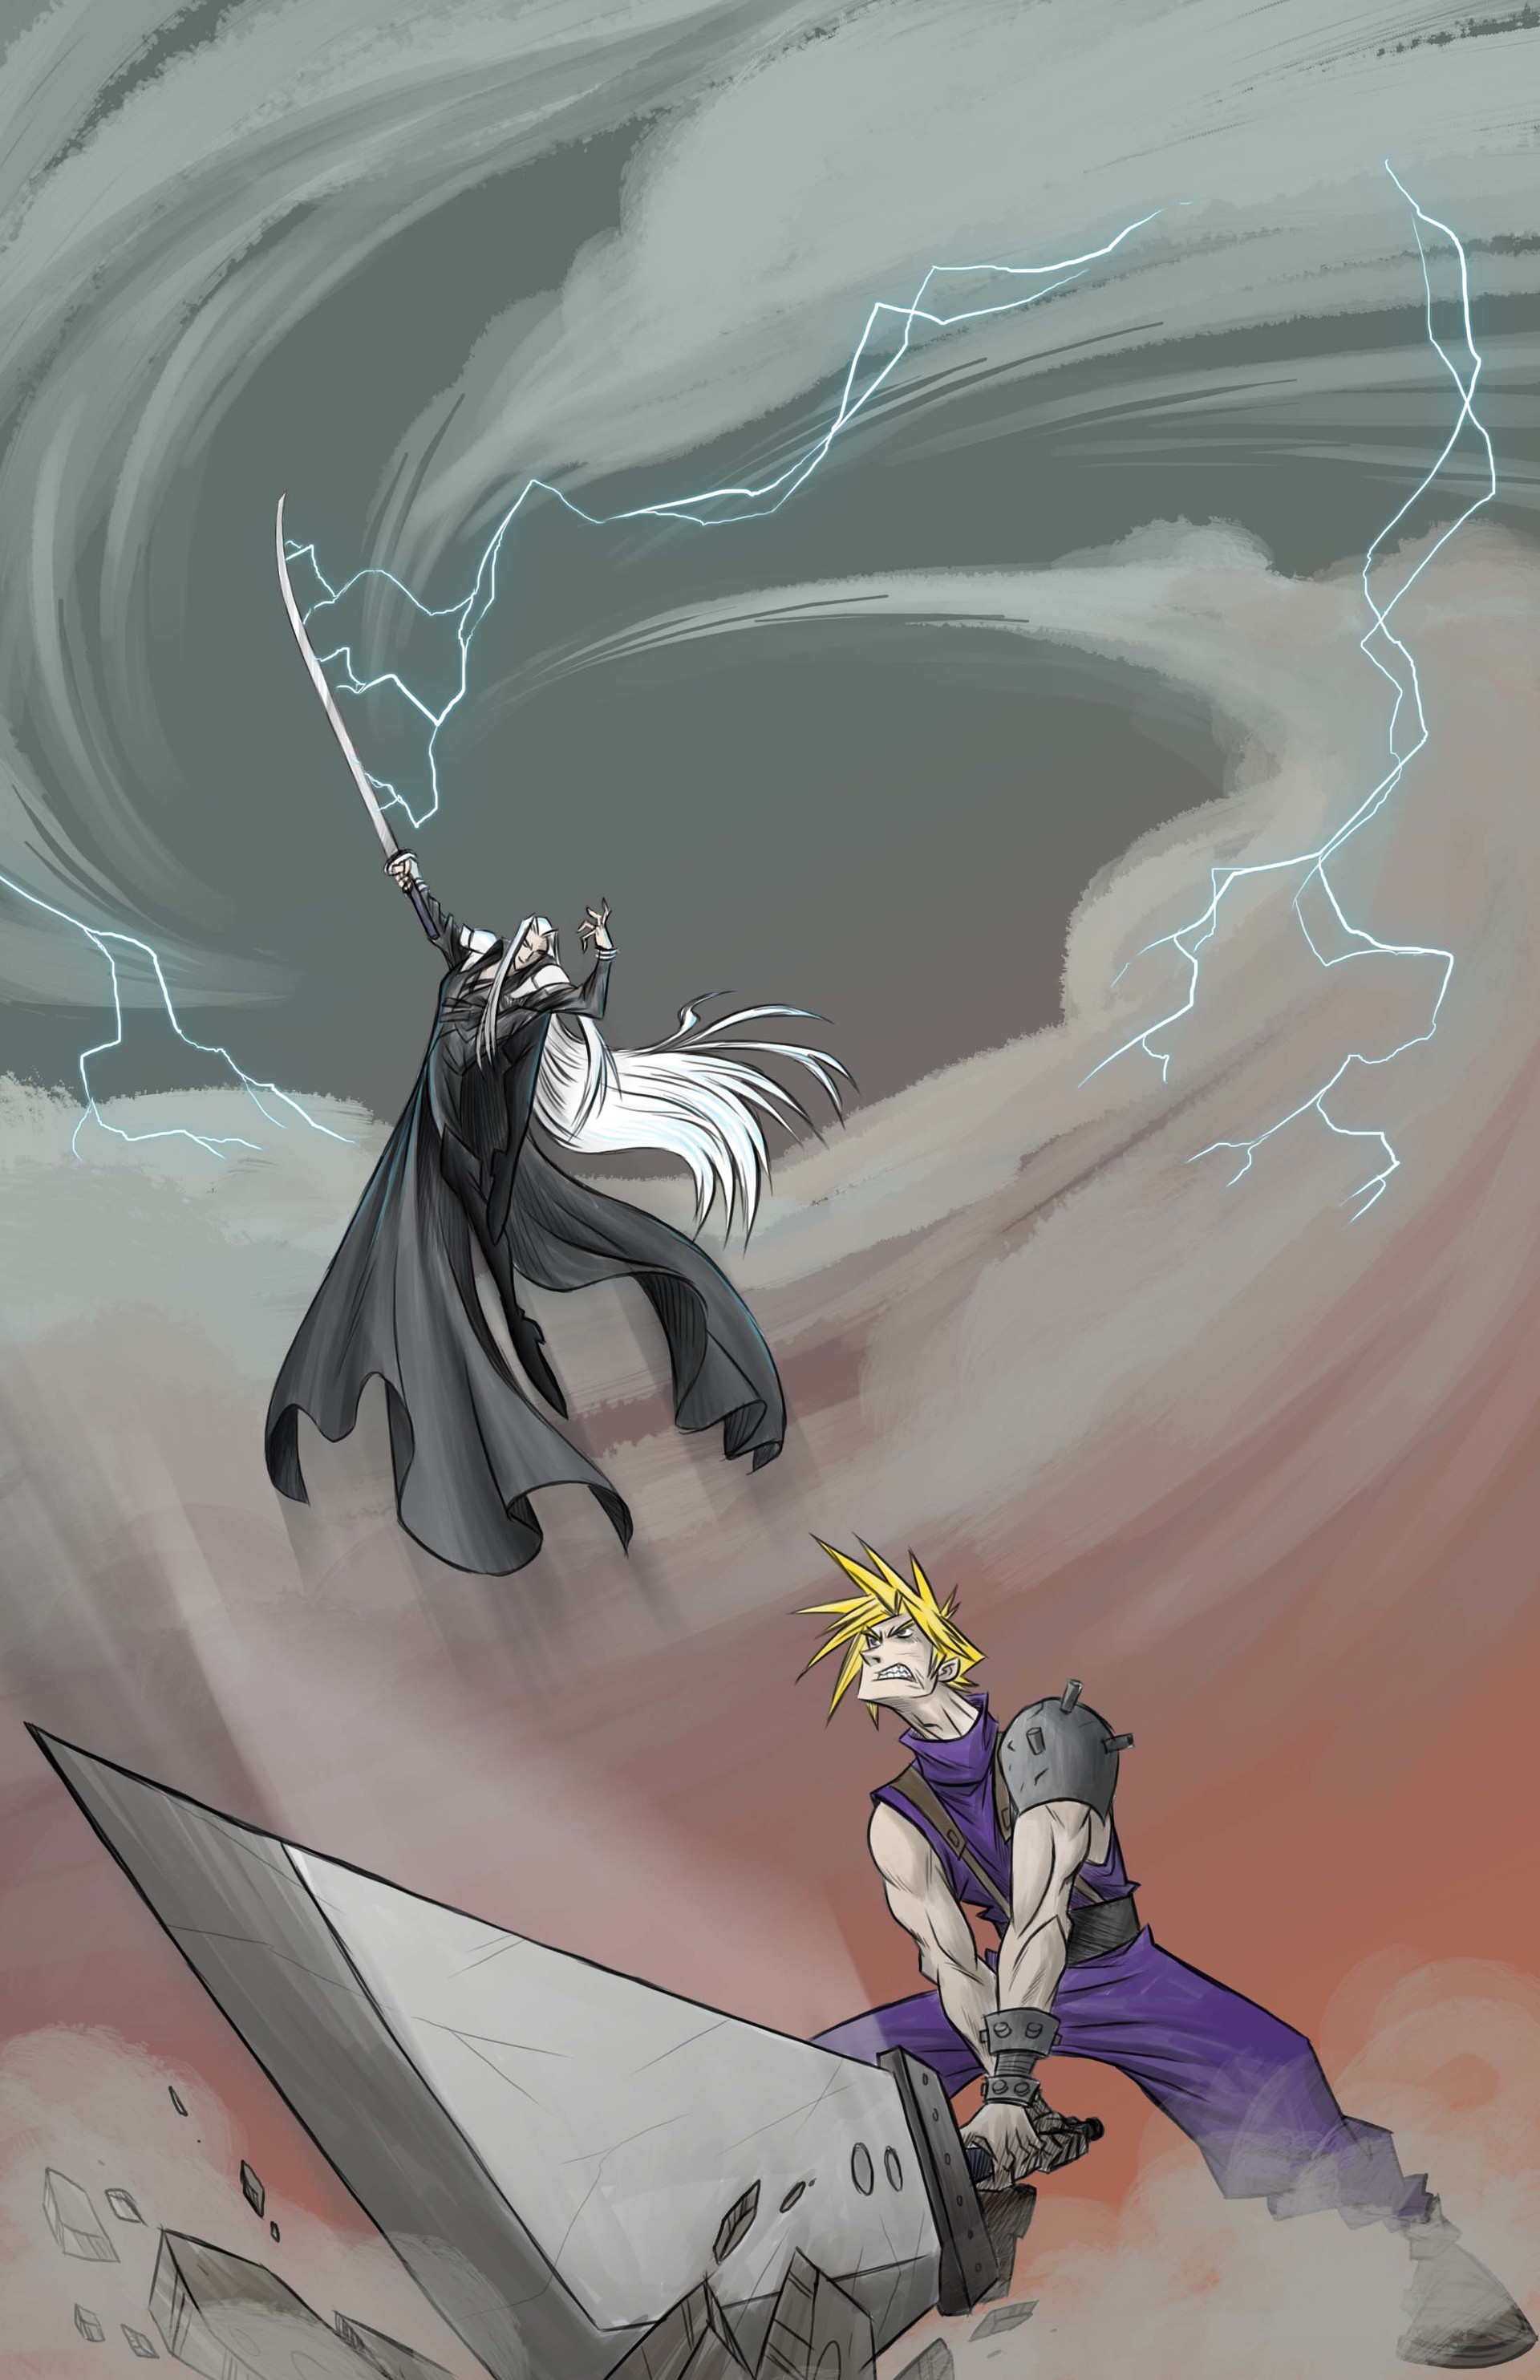 sephiroth and cloud drawing